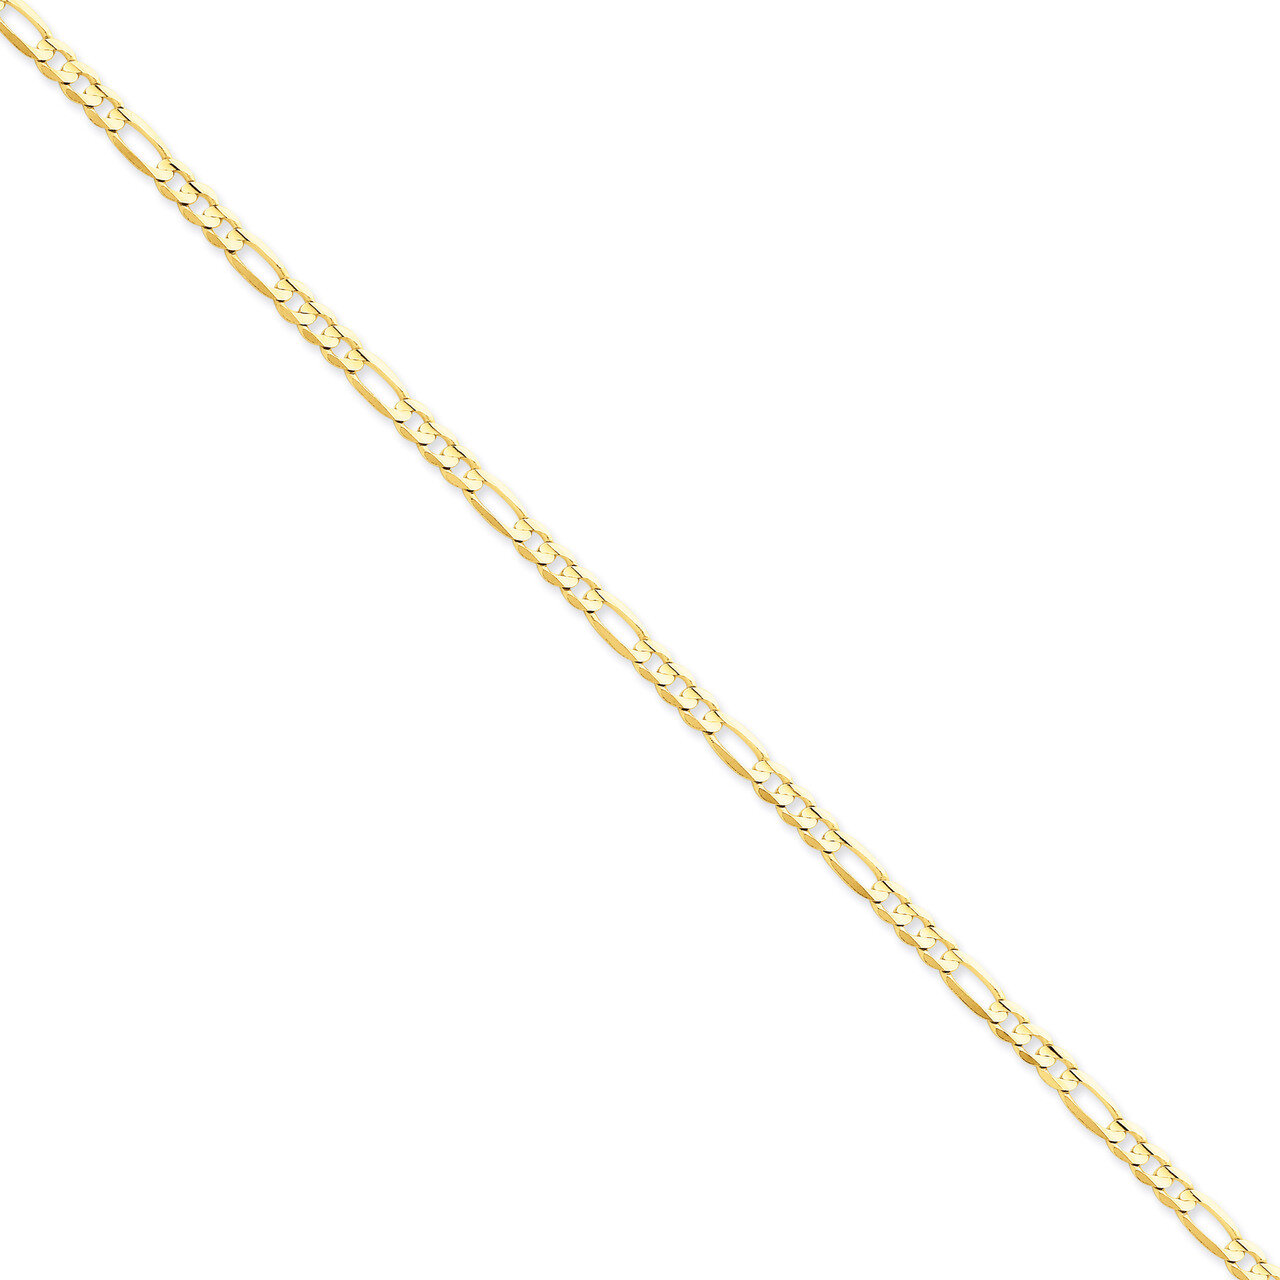 4mm Concave Open Figaro Chain 24 Inch 14k Gold LFG100-24